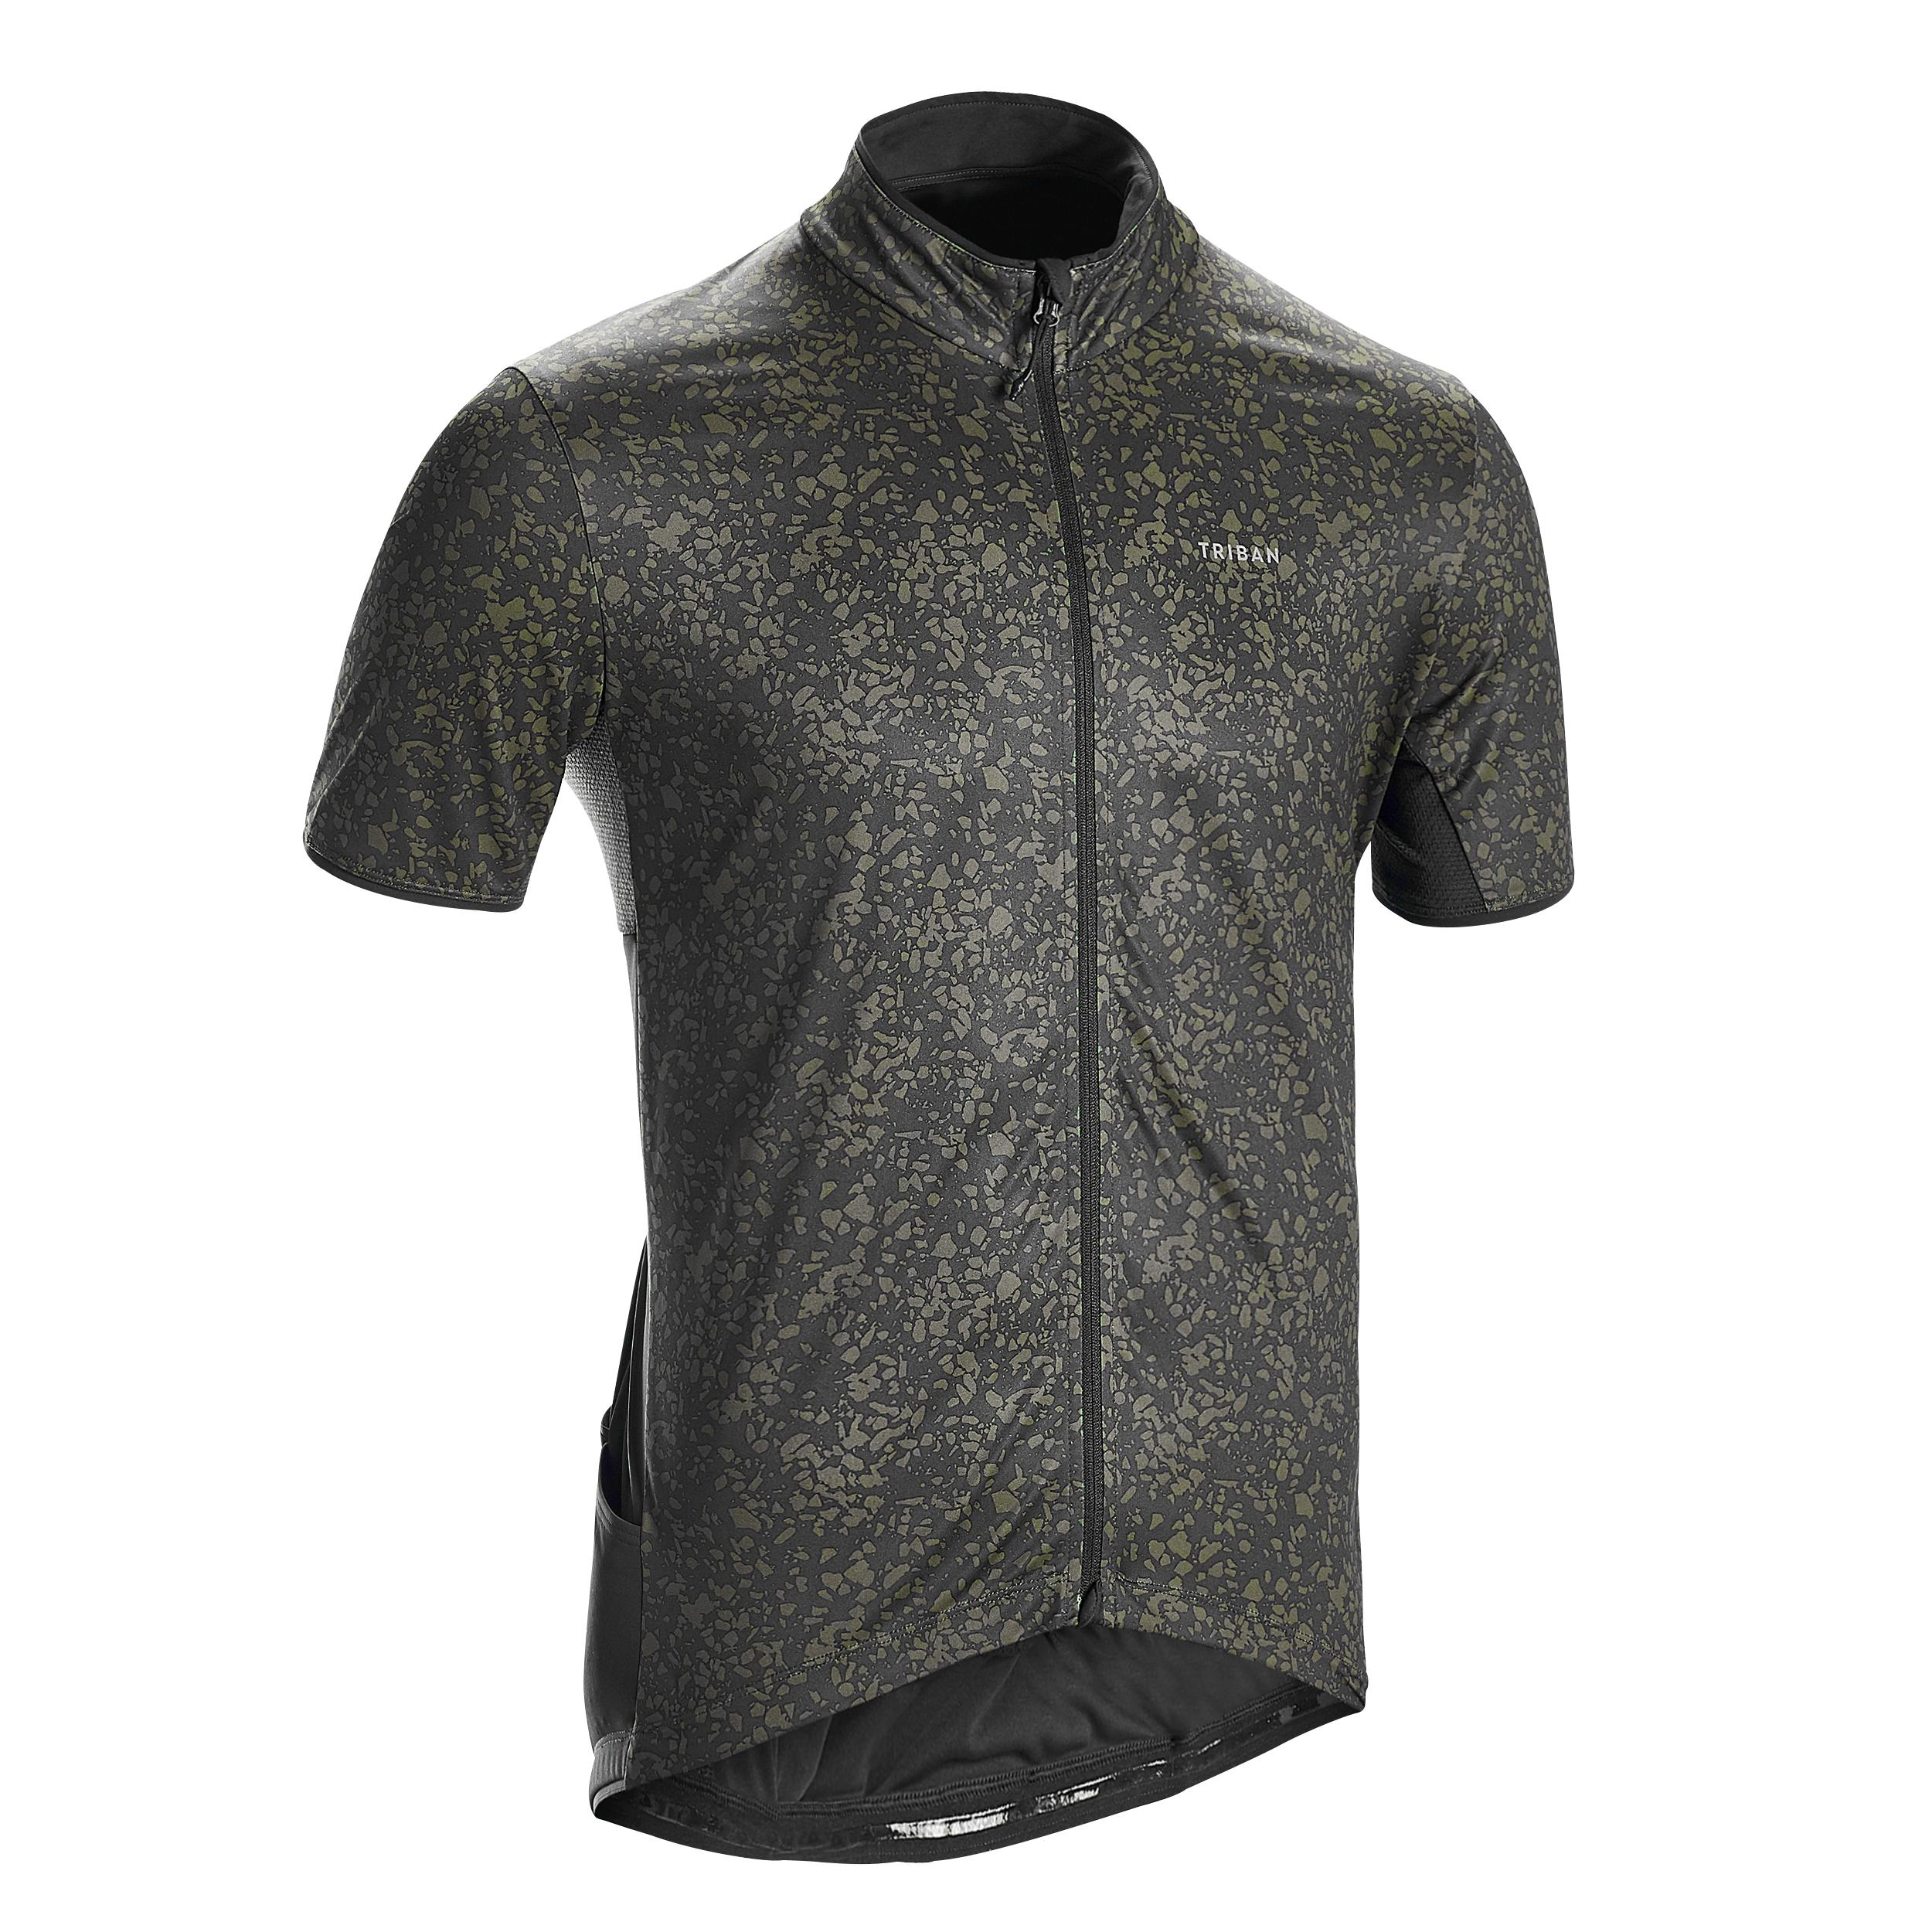 VAN RYSEL RC500 Limited Edition Gravel Short-Sleeved Road Cycling Jersey - Terrazzo